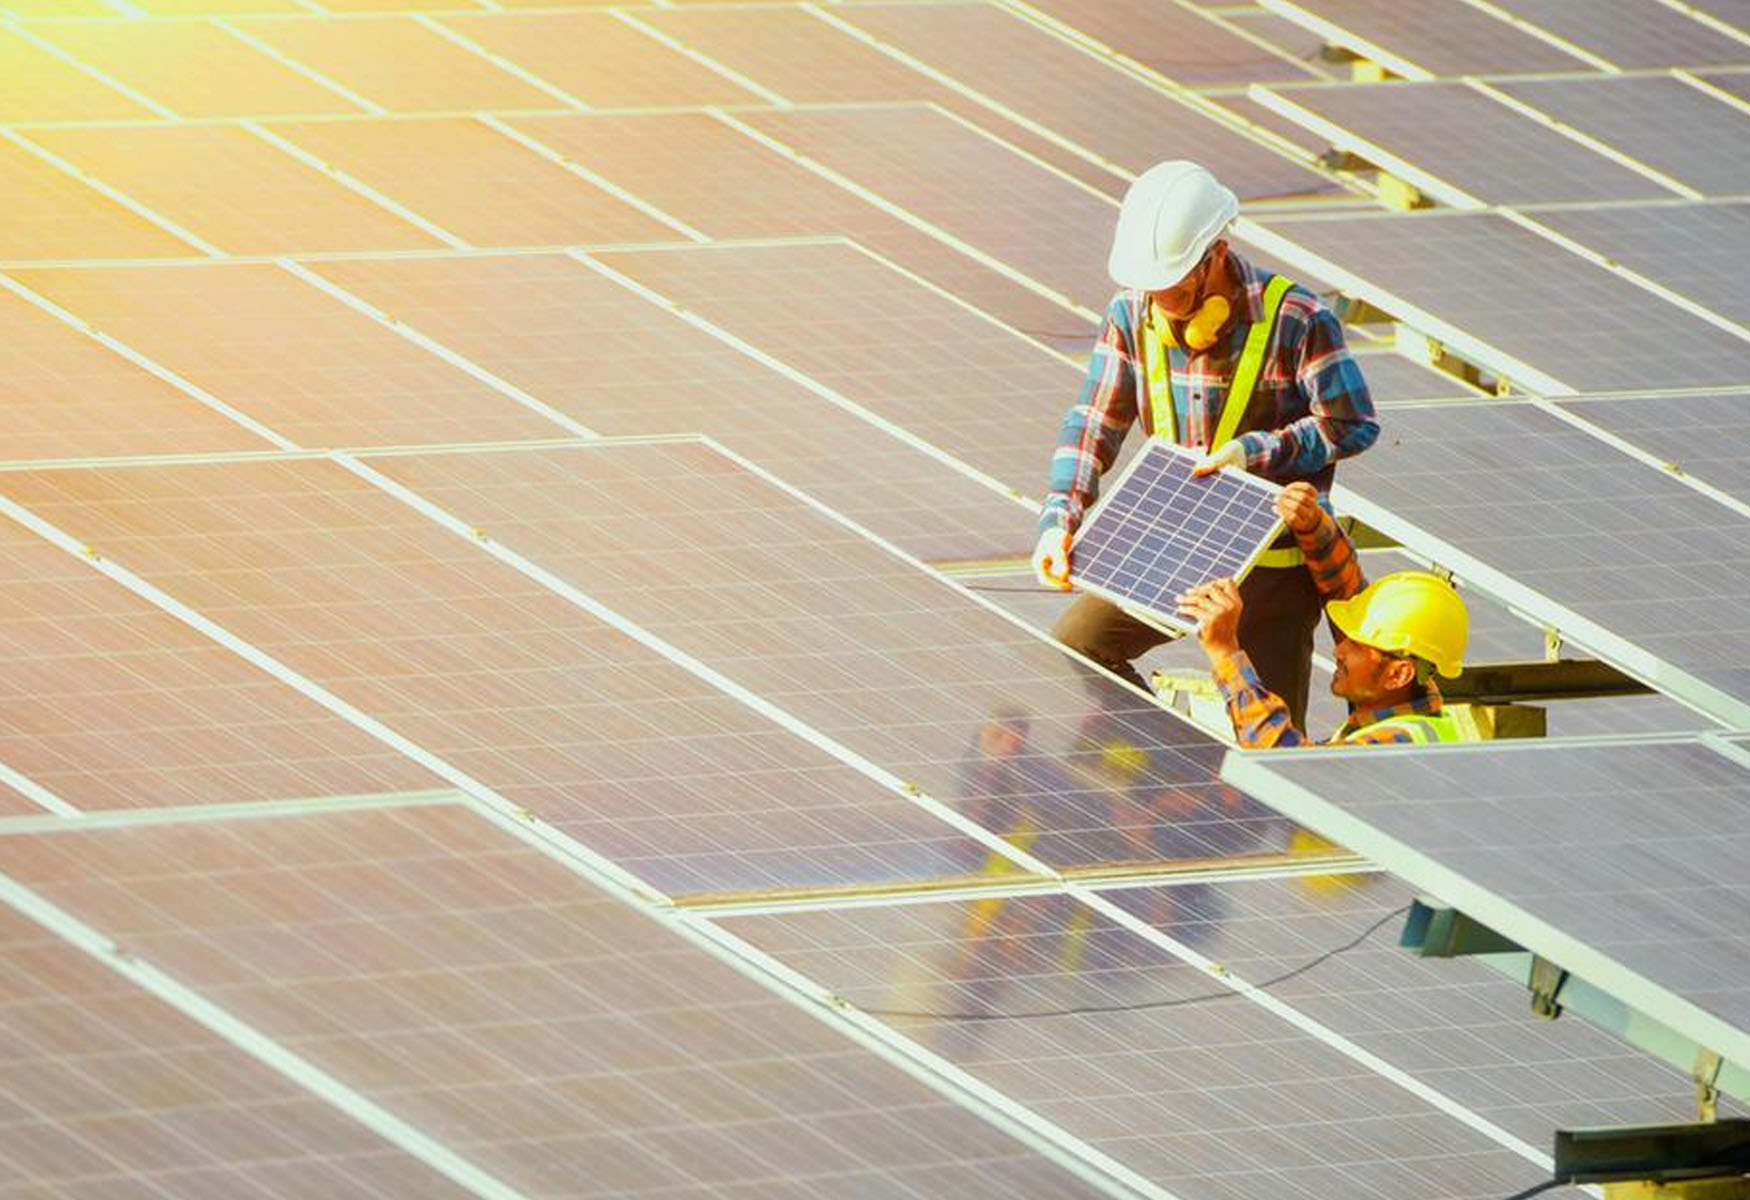 Addressing The Workforce Shortage In The Clean Energy Industry